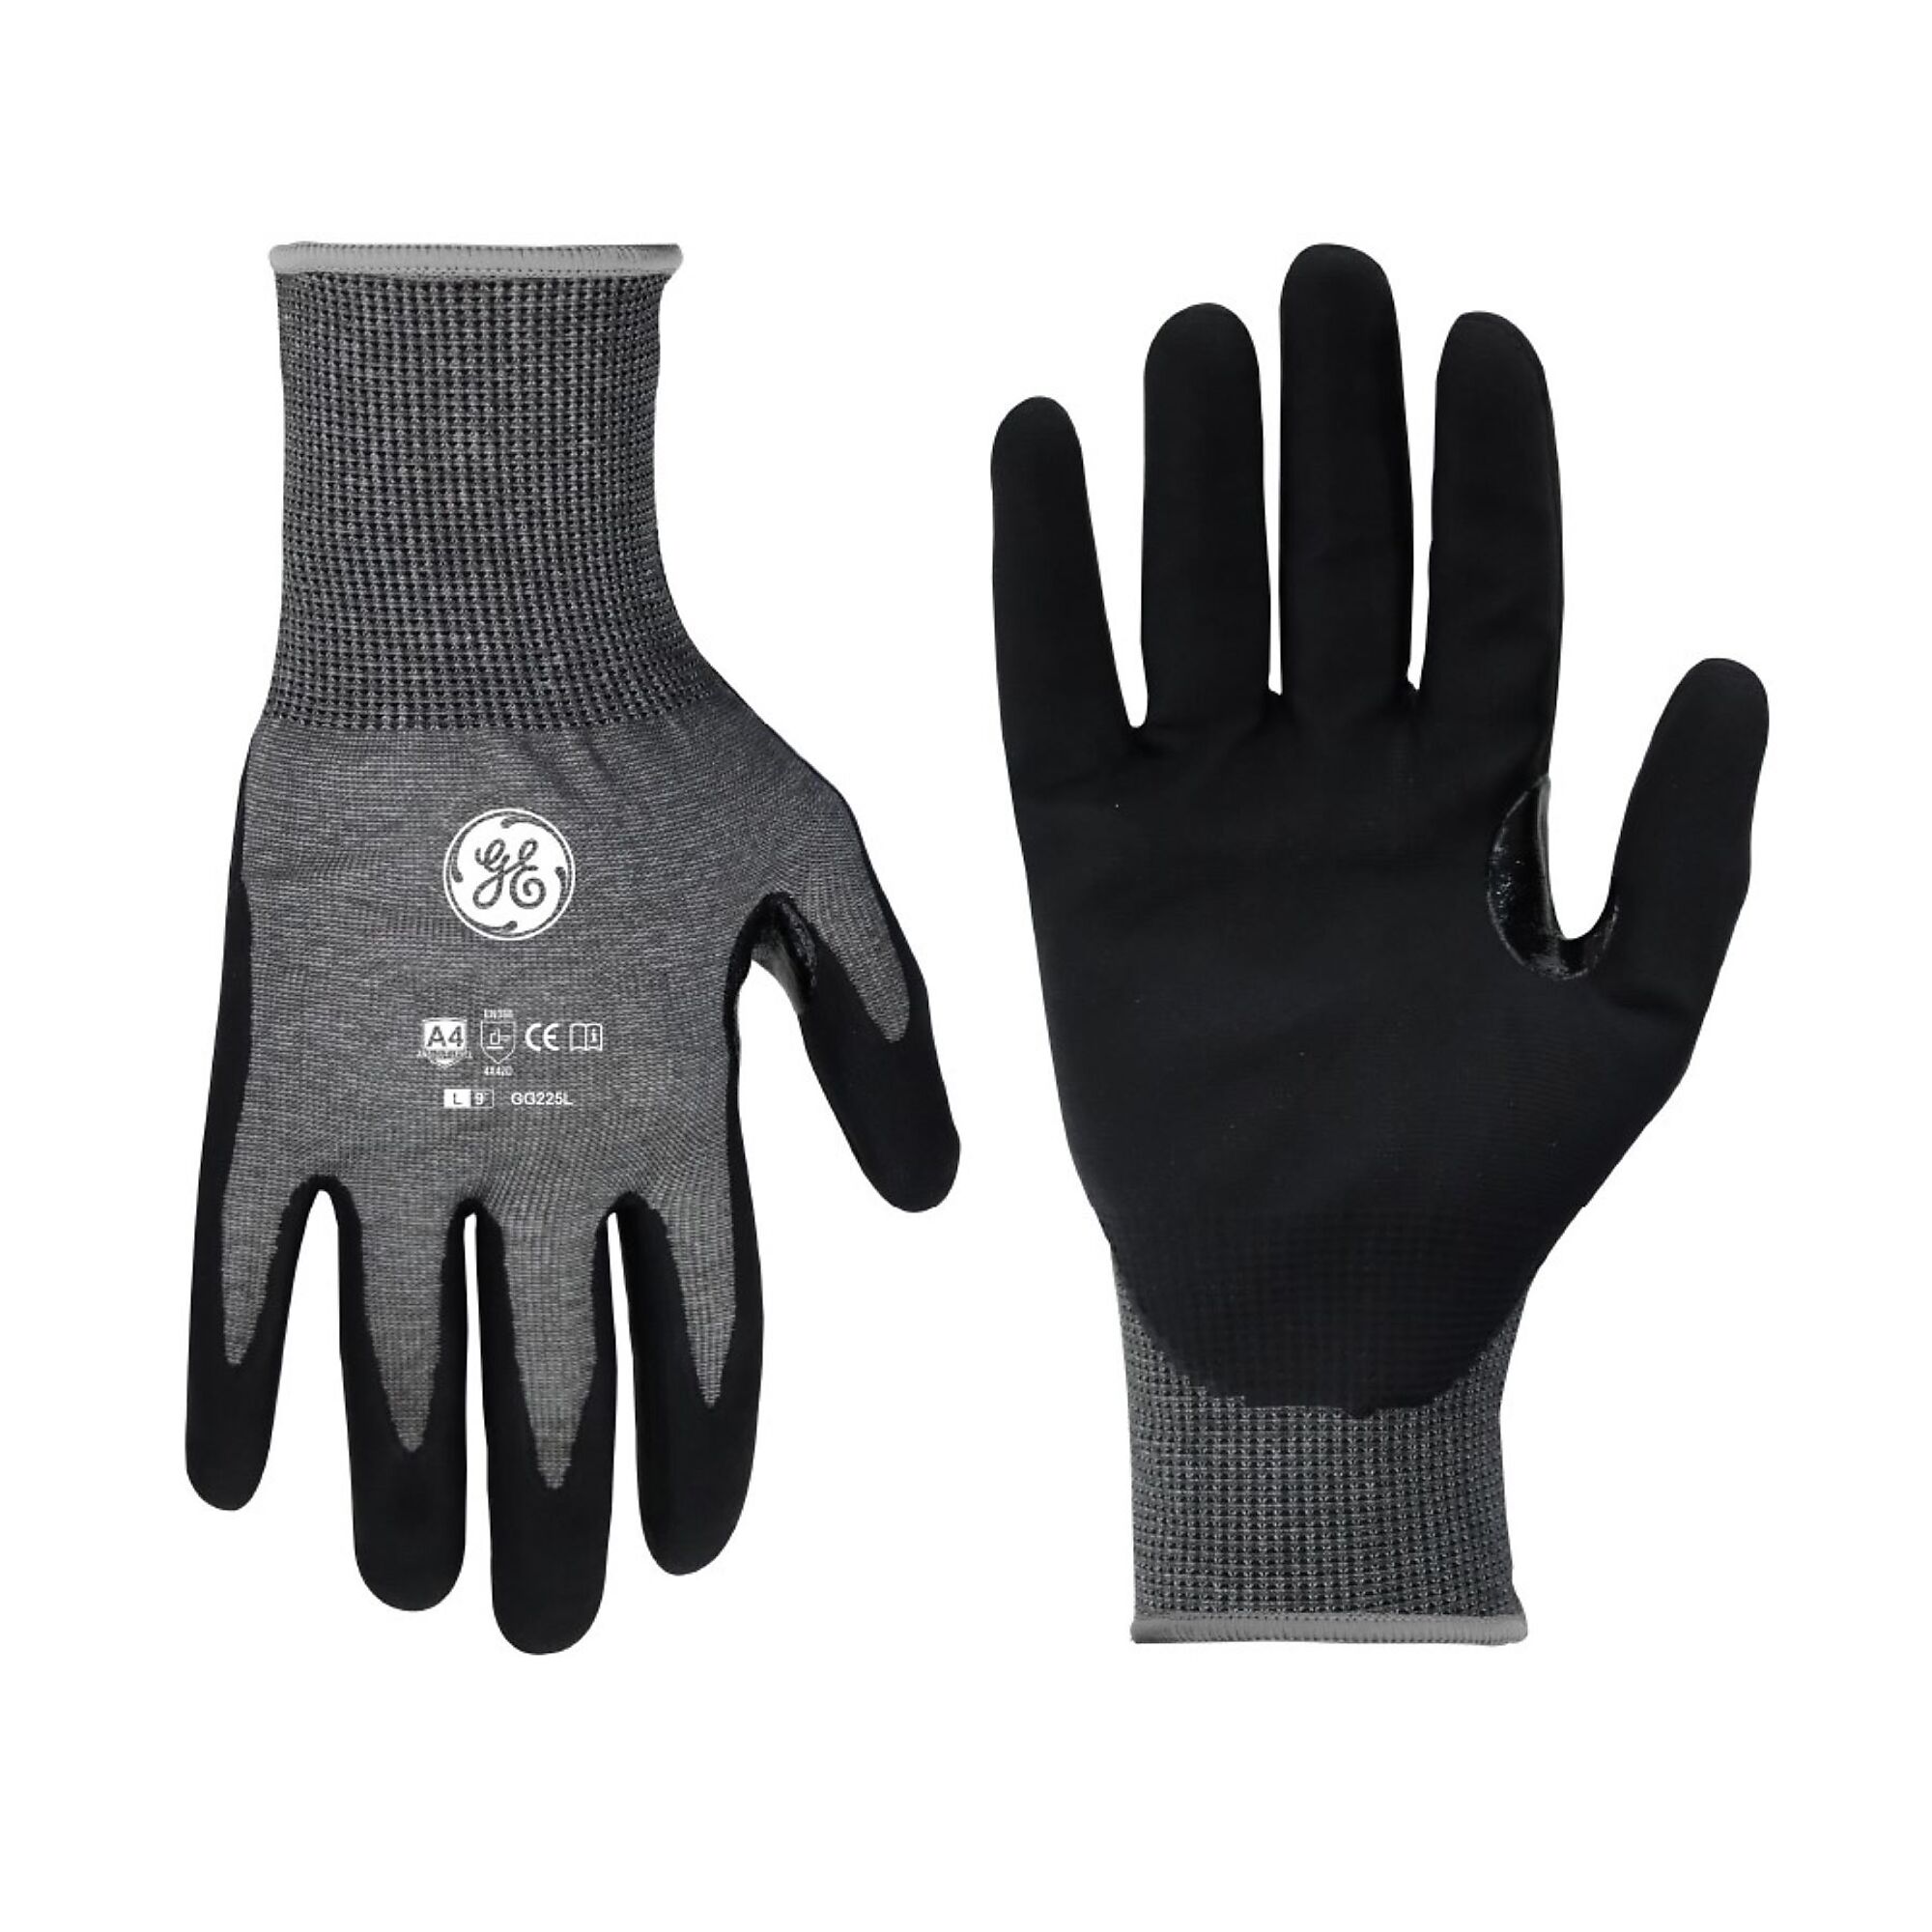 General Electric, Unisex Dipped Gloves Black/Blue L 12 pair, Size L, Included (qty.) 12, Model GG225L